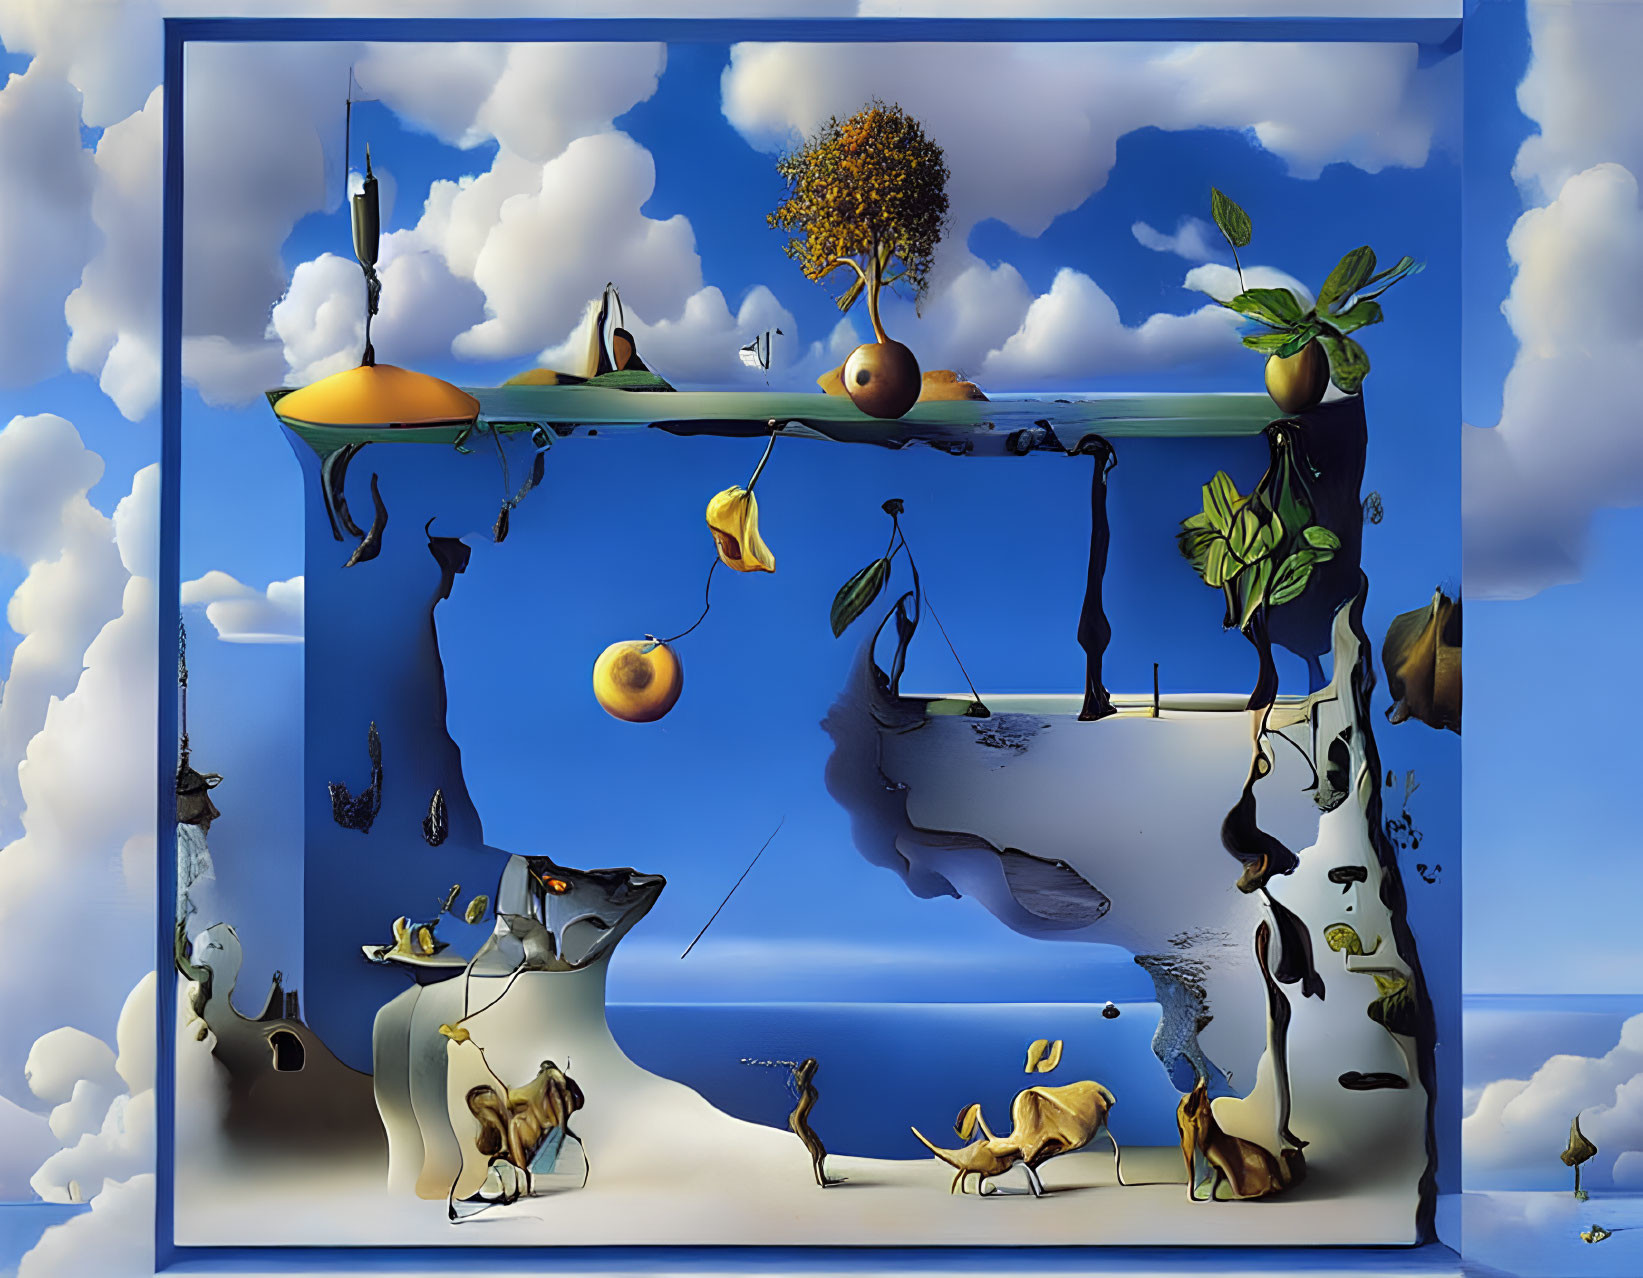 Surrealist artwork: Distorted perspectives, fruit, tree, clouds, melting objects, reflective surfaces